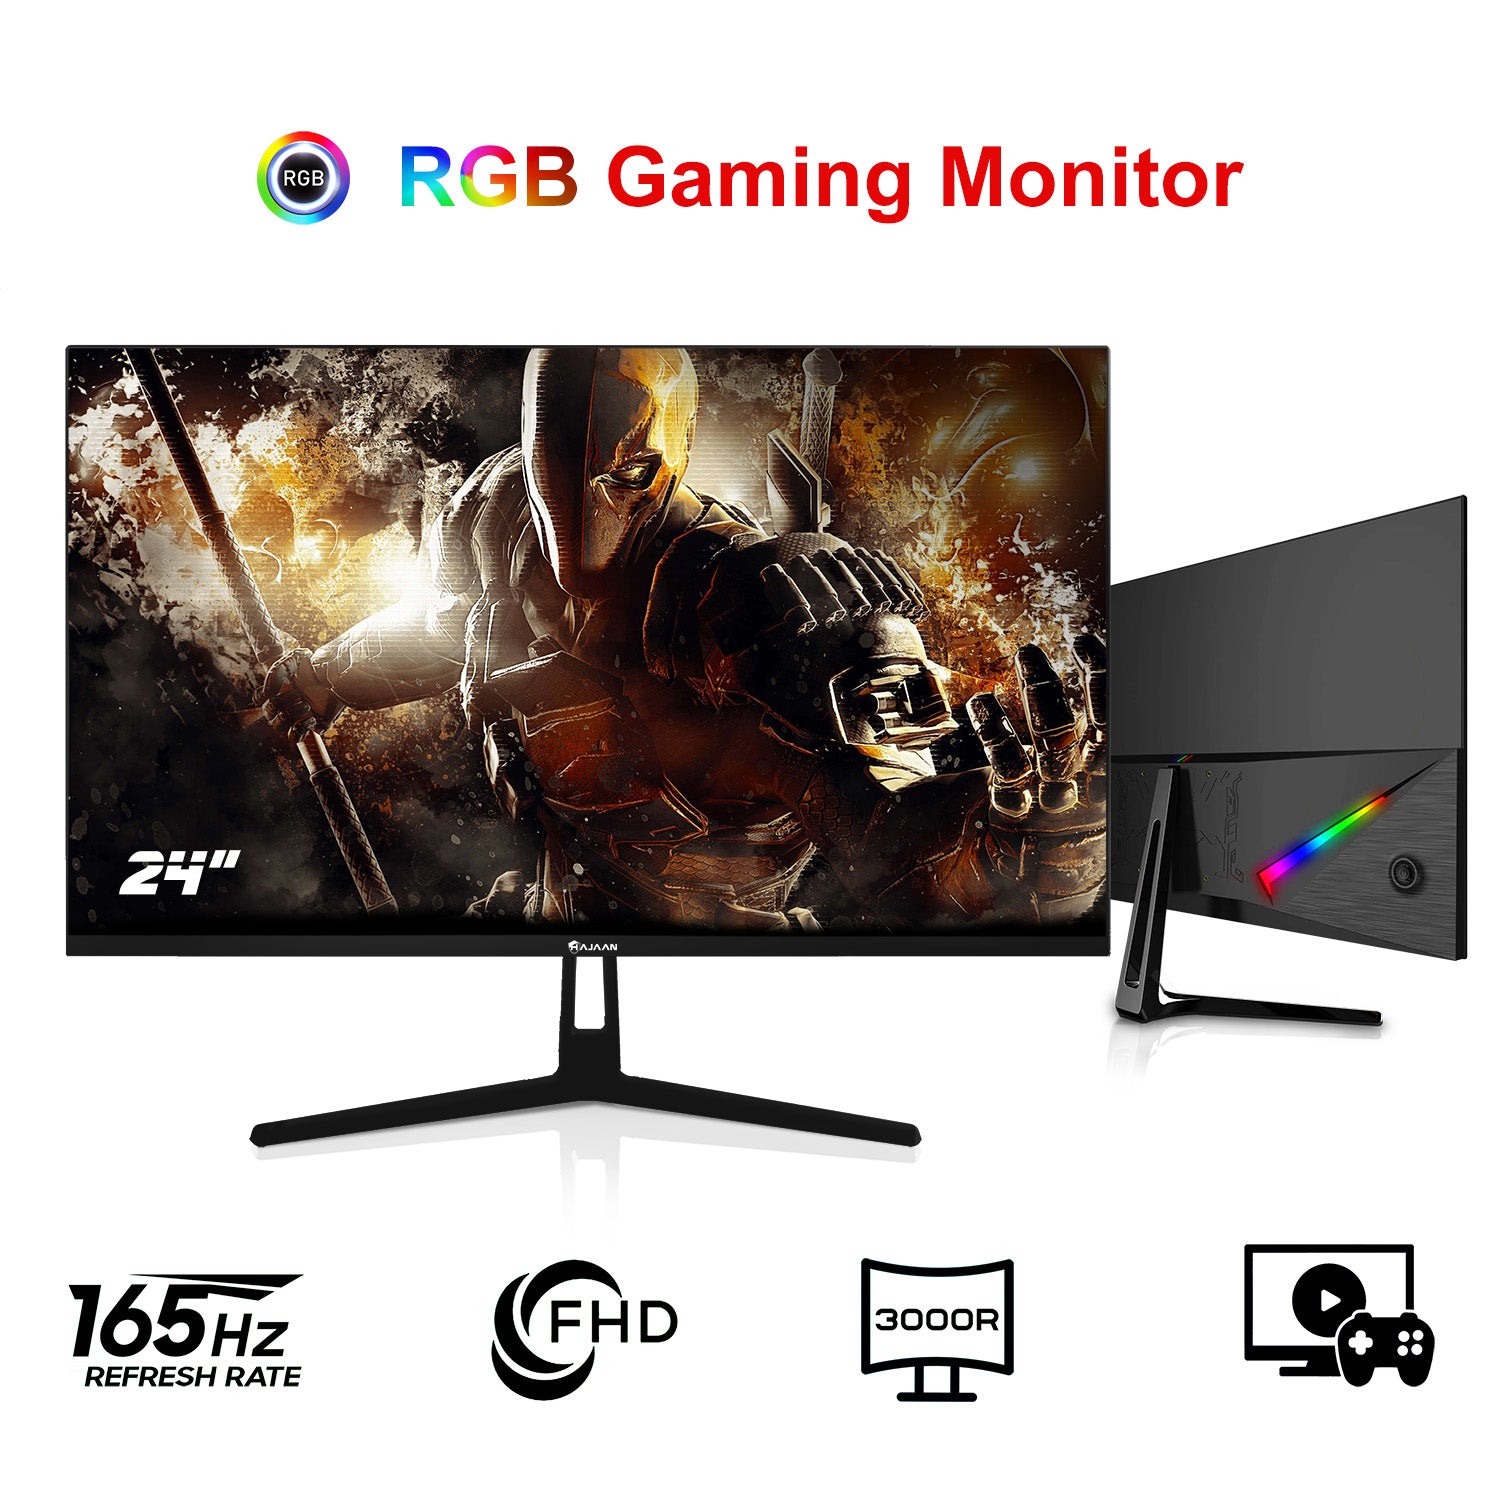 HAJAAN 24” Inch FHD 1080p Curved Gaming Monitor with RGB lighting, 165 Hz Refresh Rate, Tilt Adjustment, Wall Mountable HDMI, DP, USB Ports (X2423C) - 1 Year Warranty